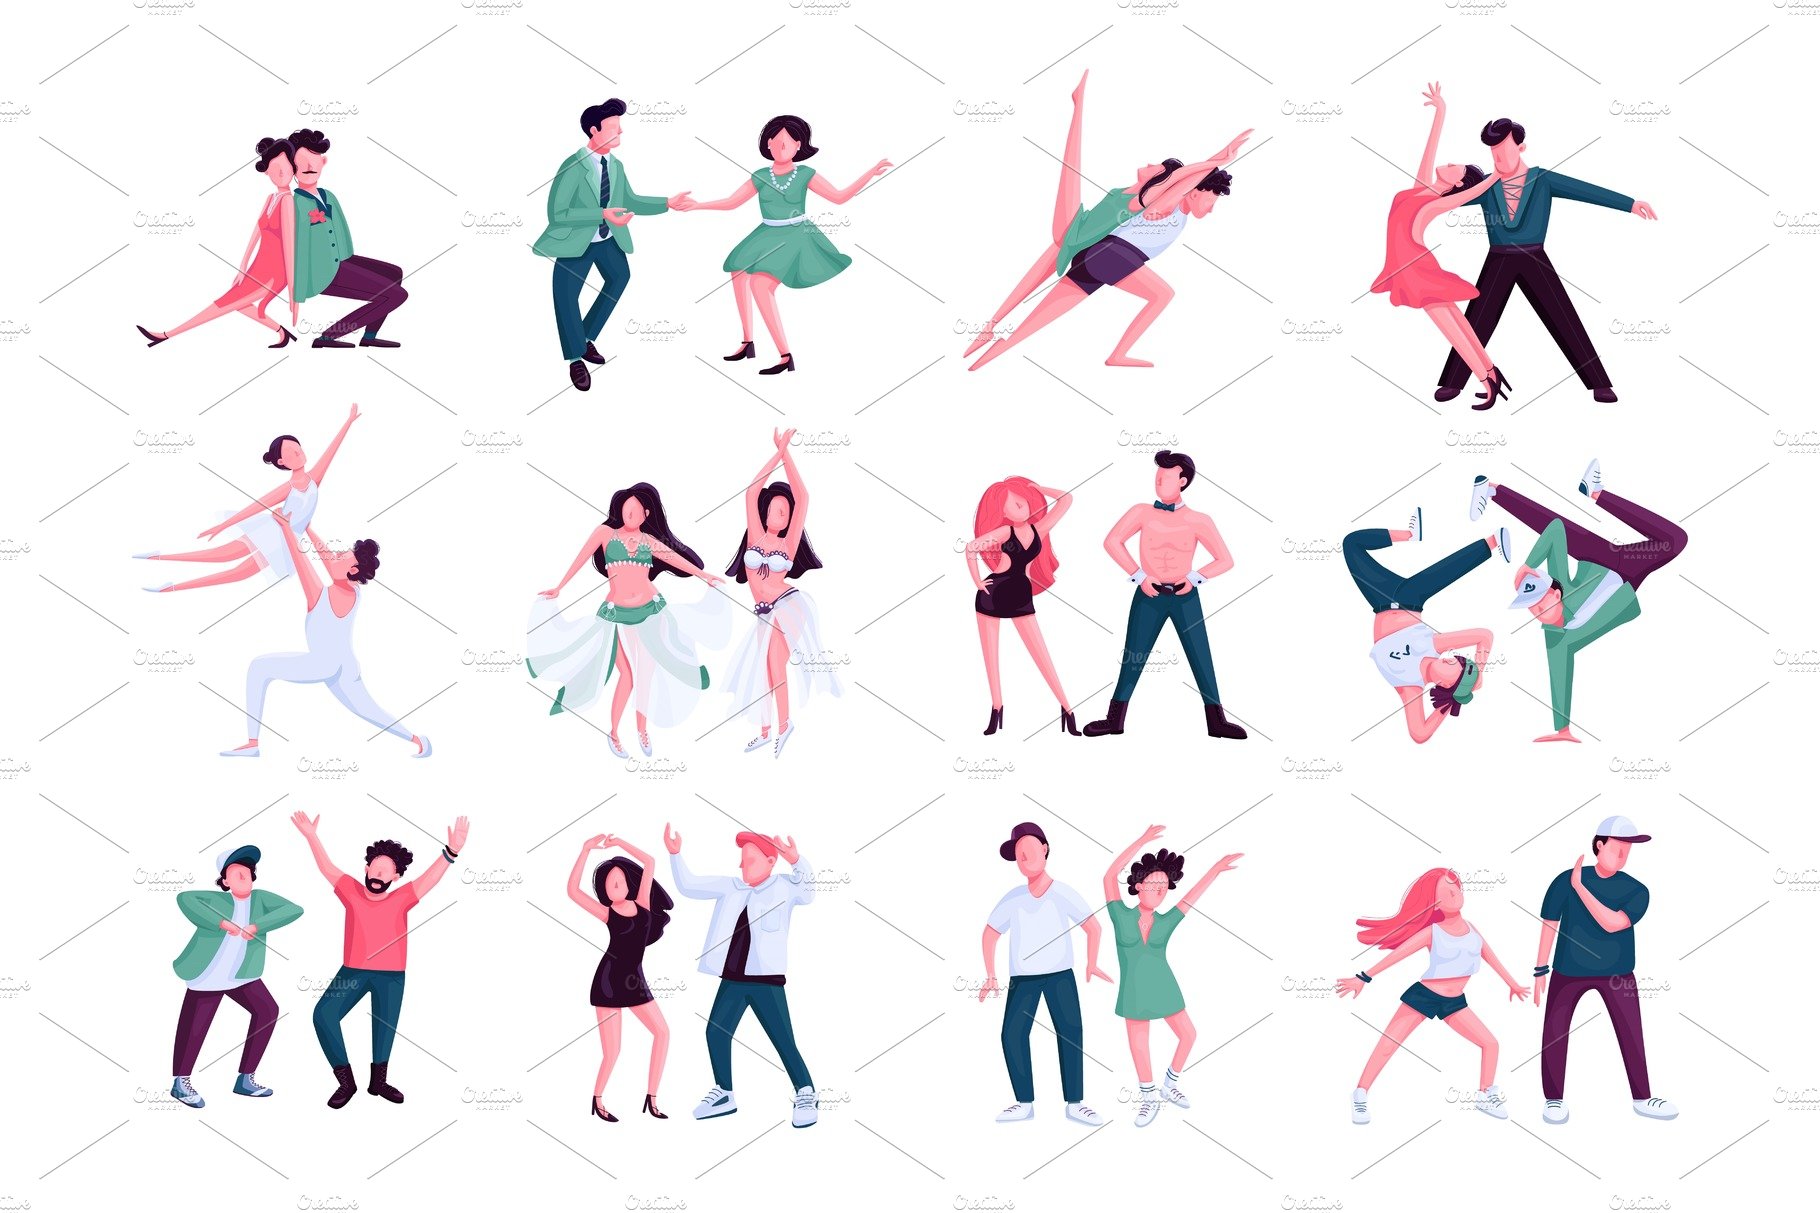 Partner dance characters set cover image.